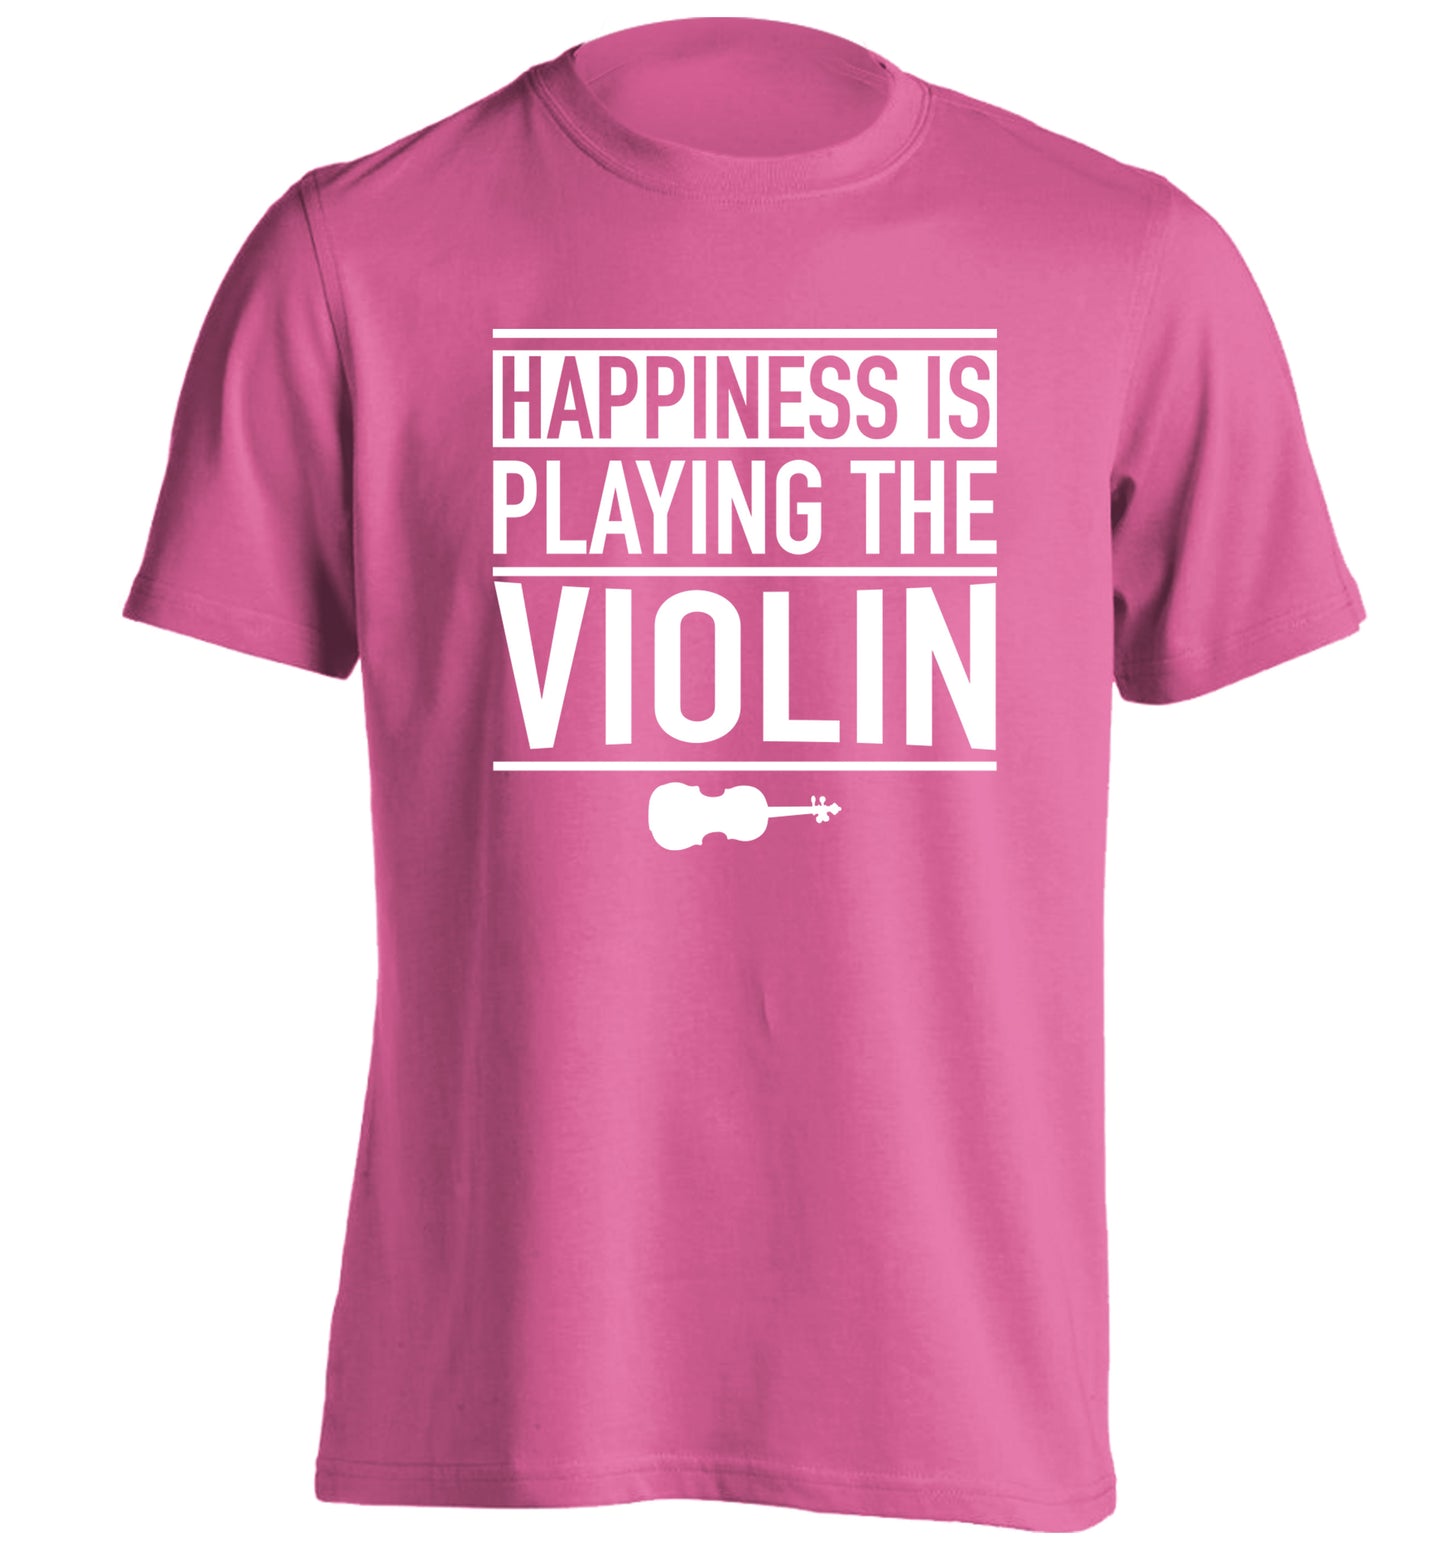 Happiness is playing the violin adults unisex pink Tshirt 2XL